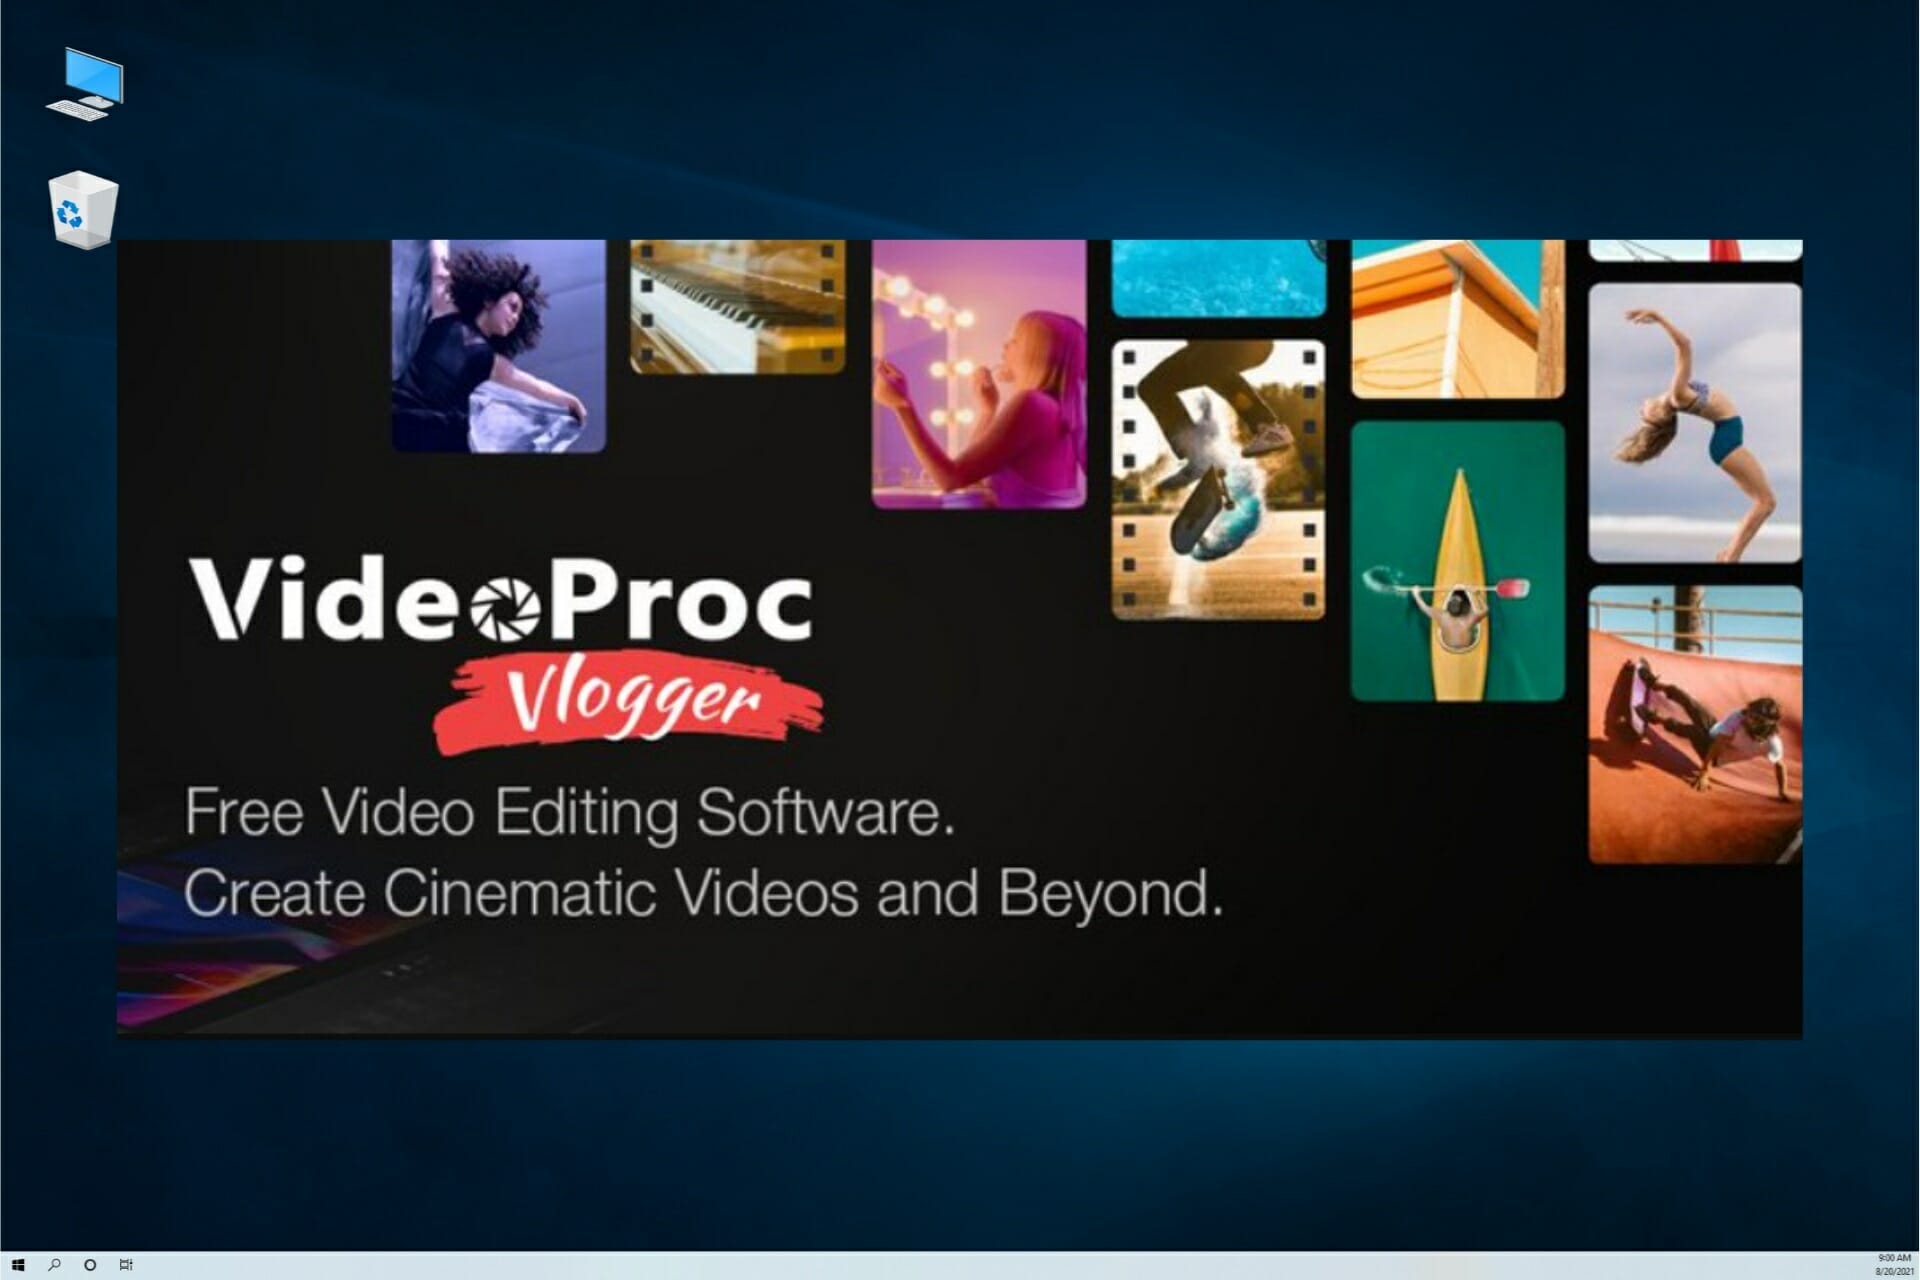 how to use videoproc vlogger